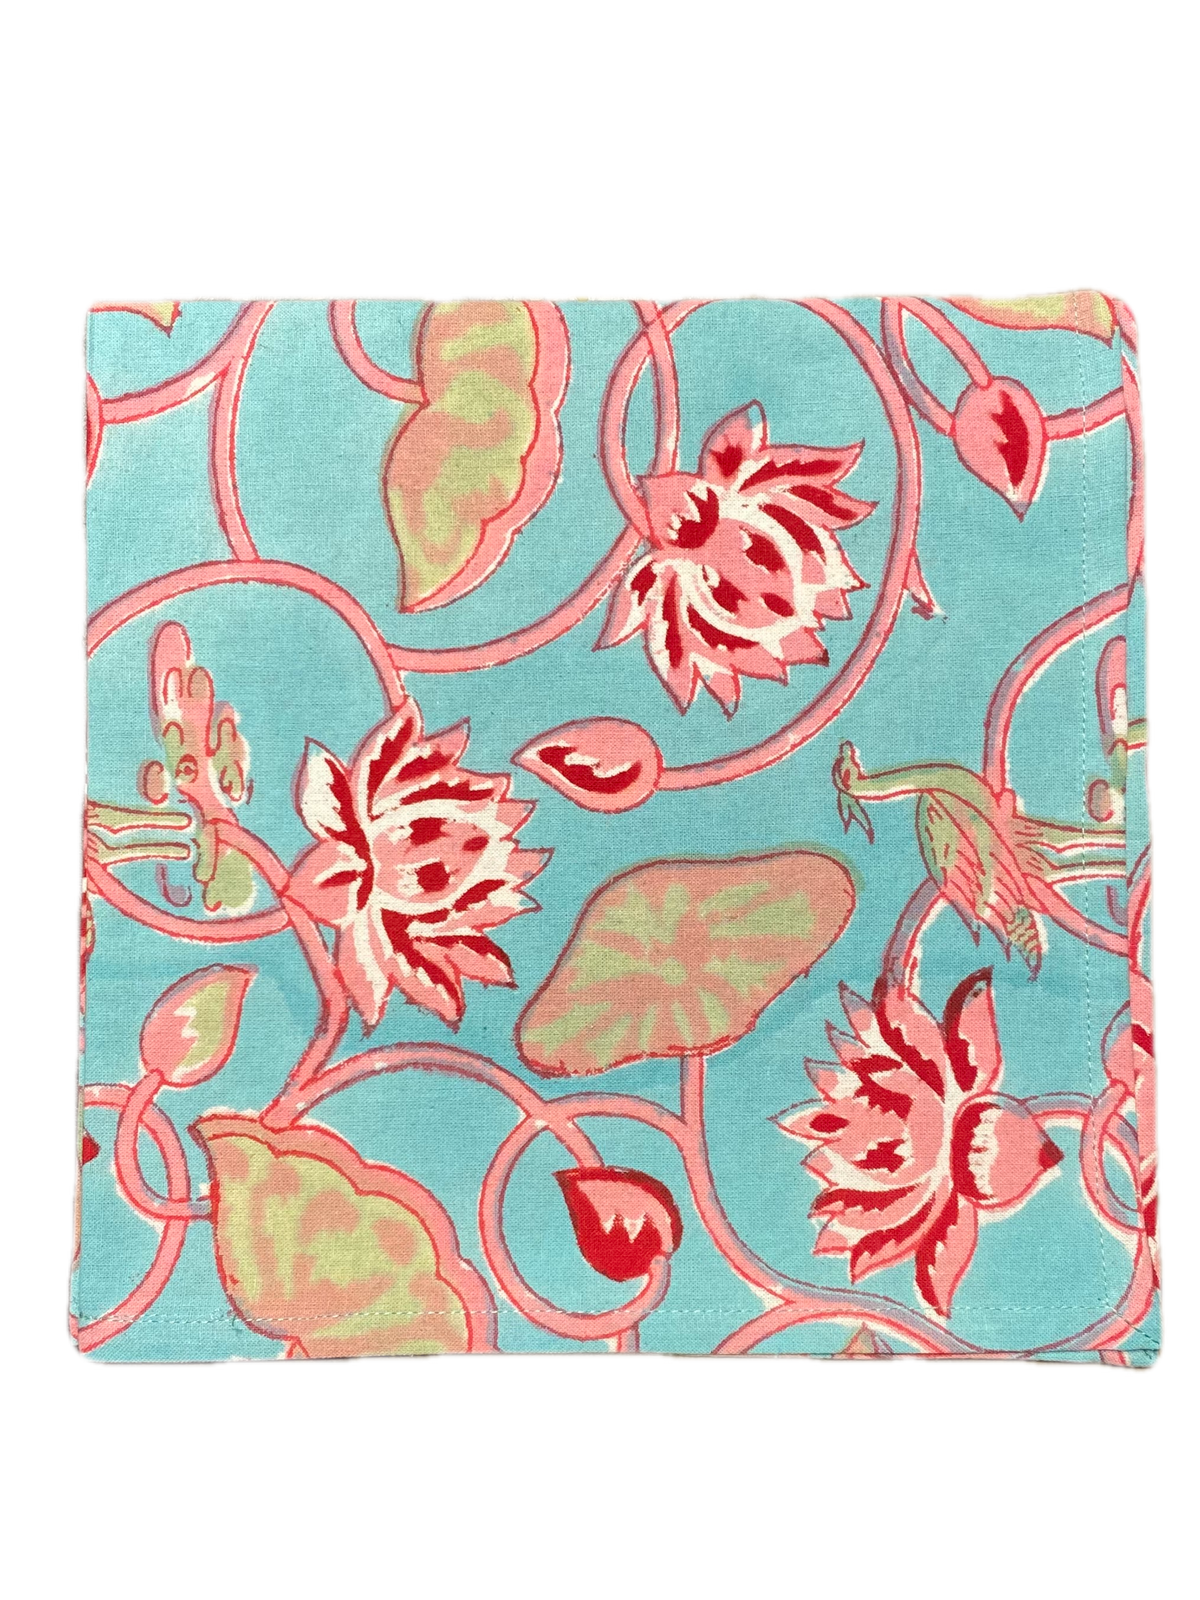 Block Print Red Dahlias in Turquoise Tablecloth Napkin